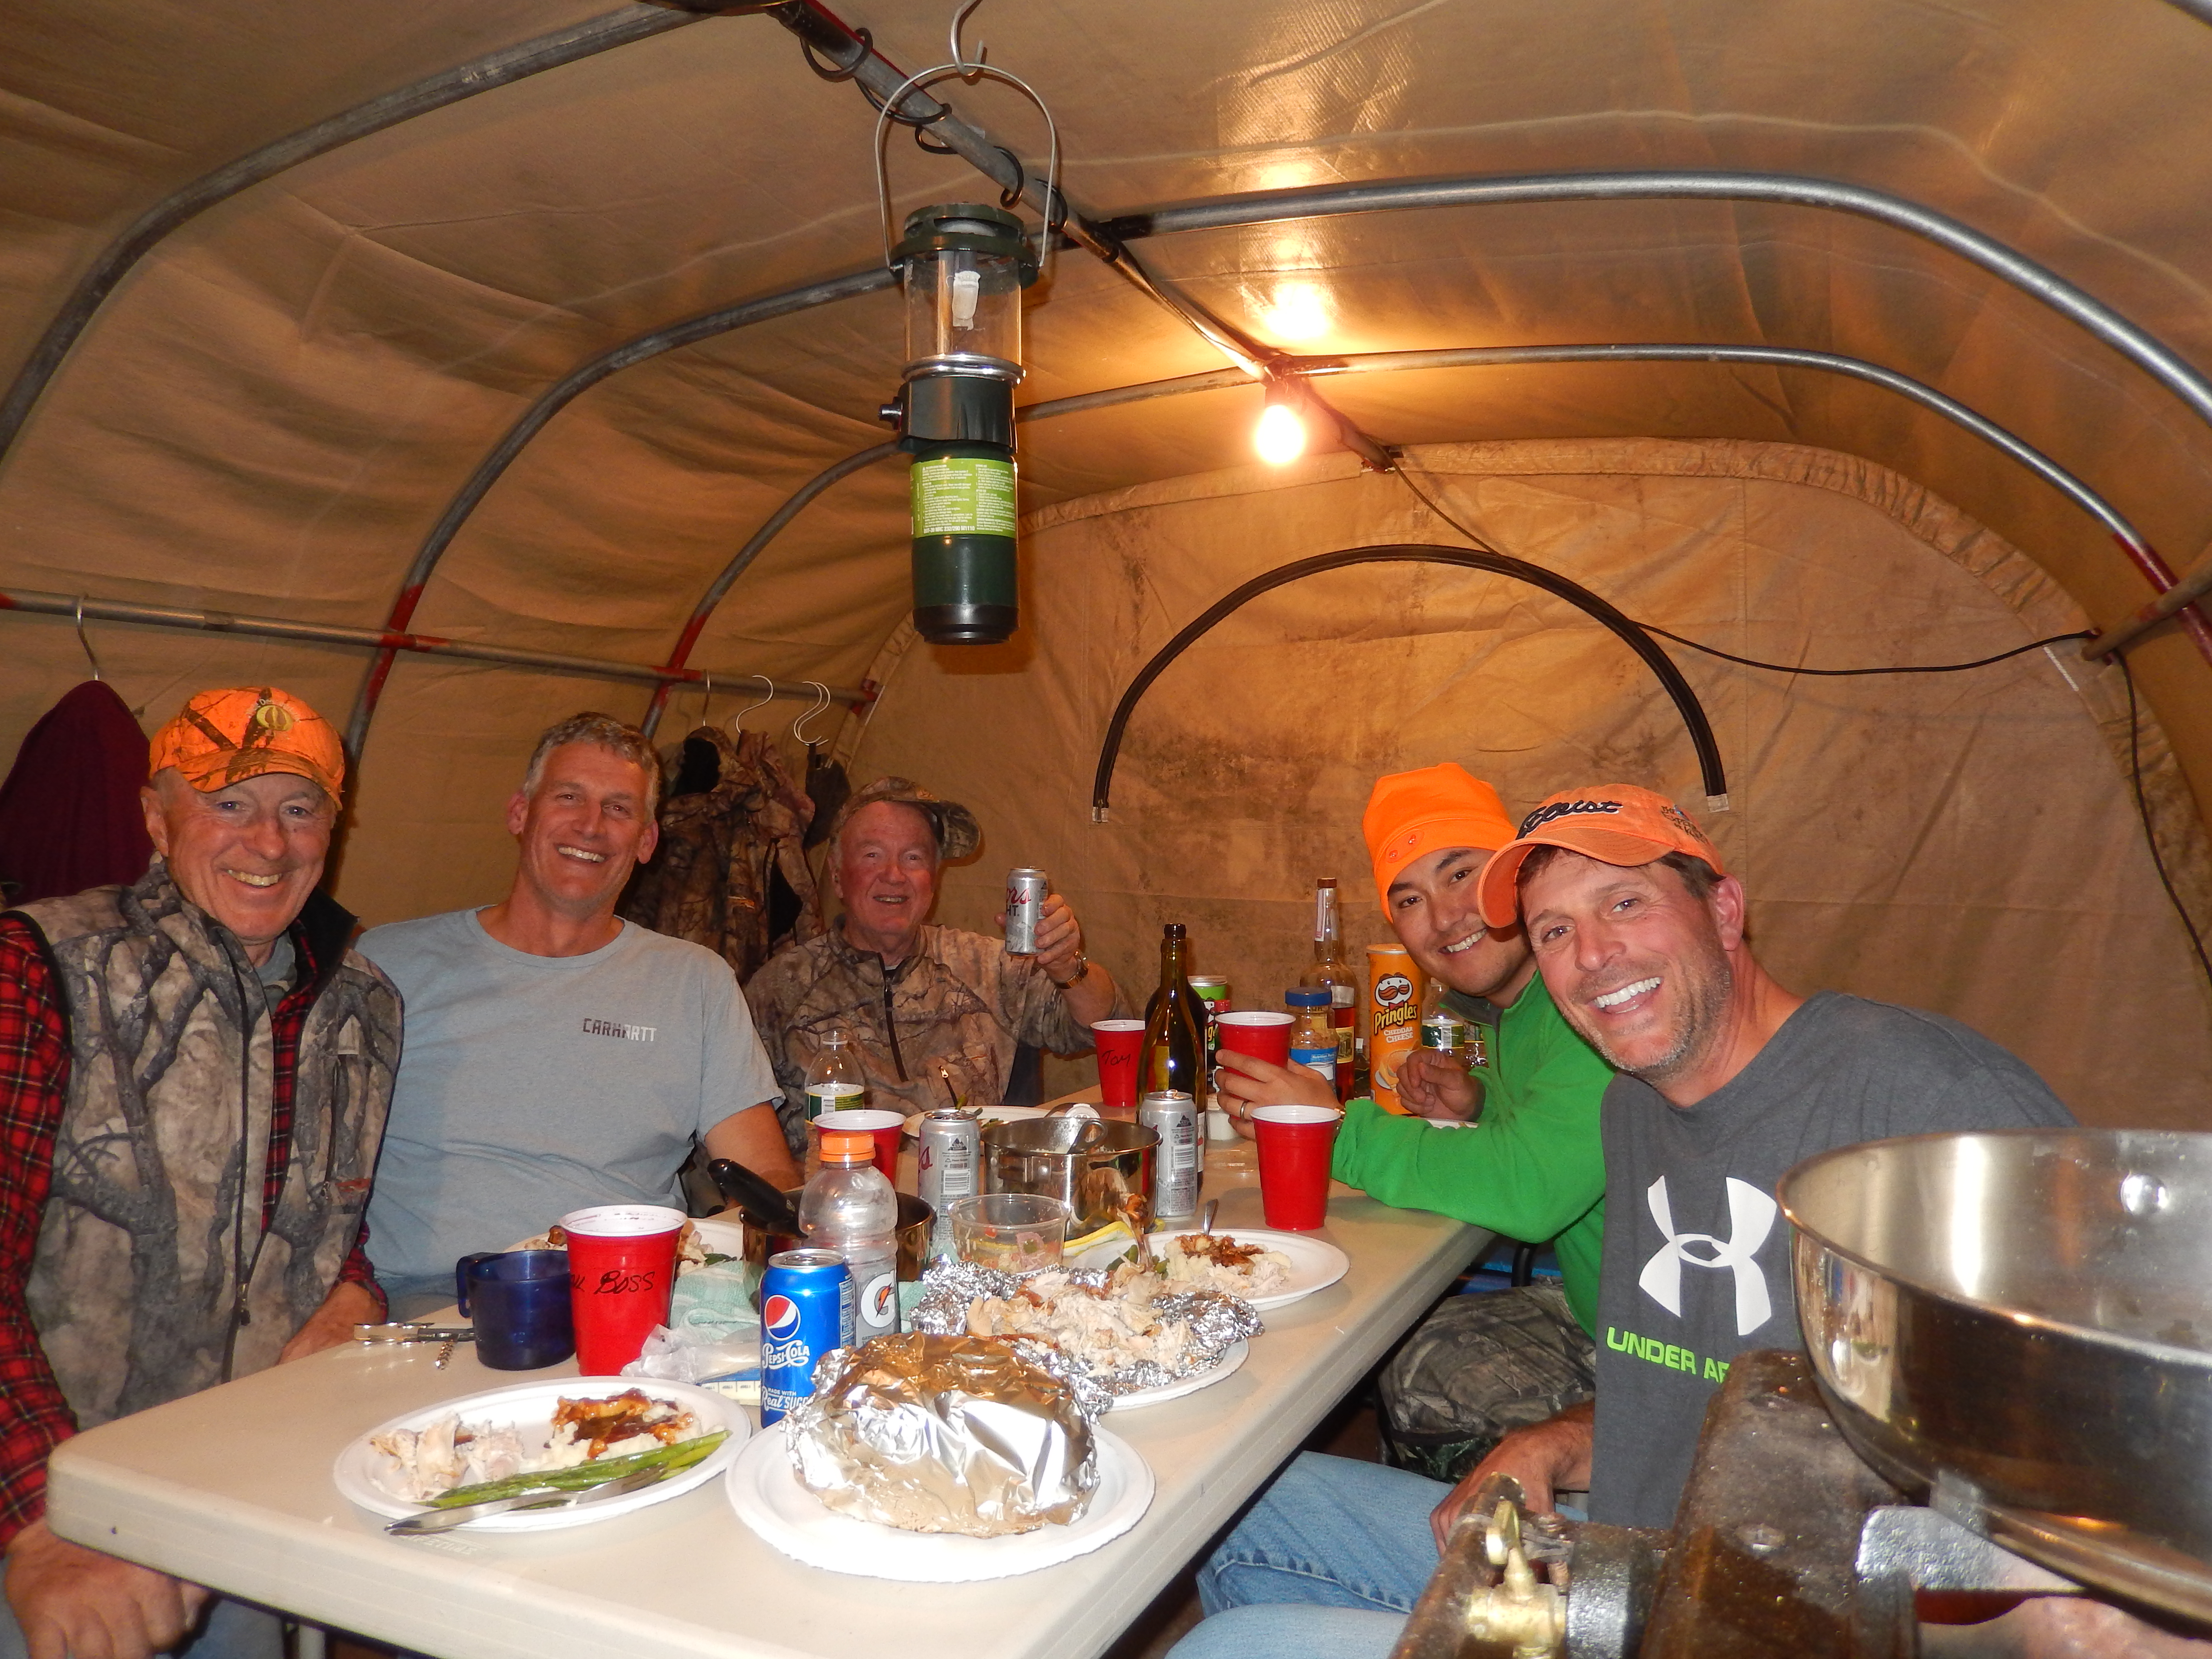 George Bettas and a group of friends enjoying a backcountry meal.